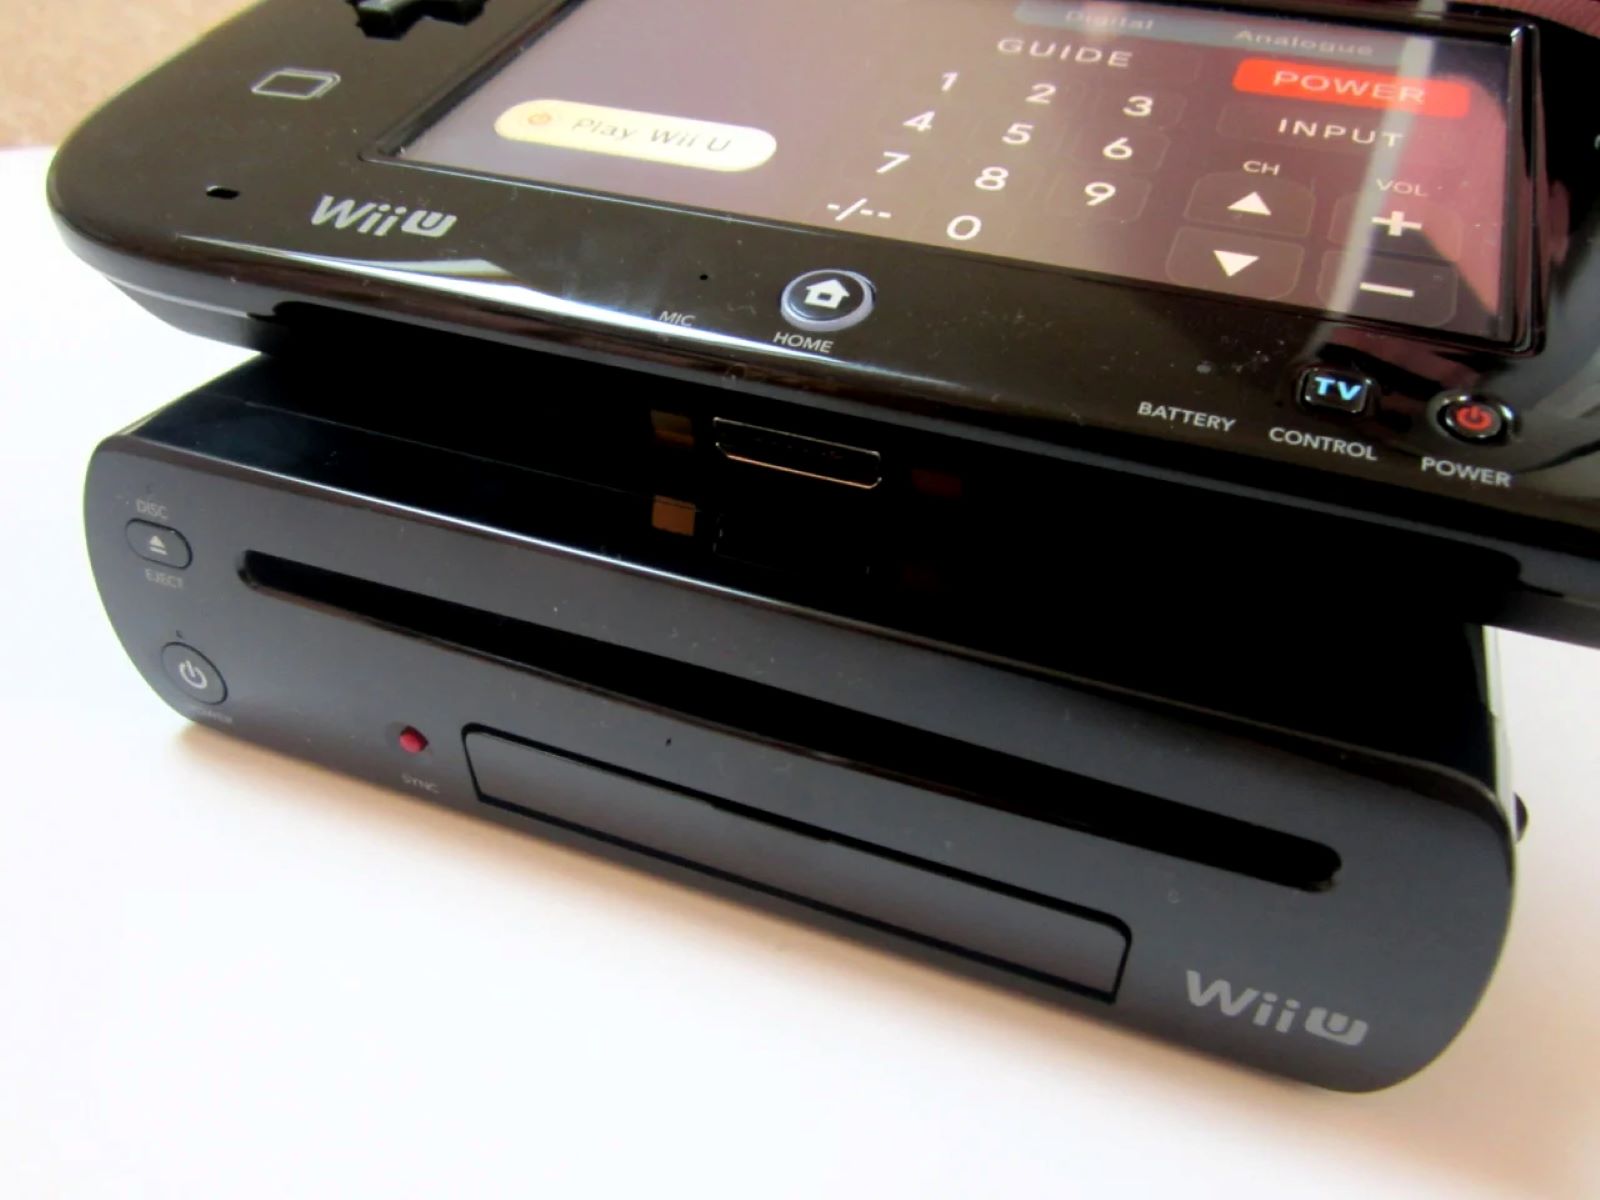 Connect Wii U Gamepad To Android: Step-by-Step Guide